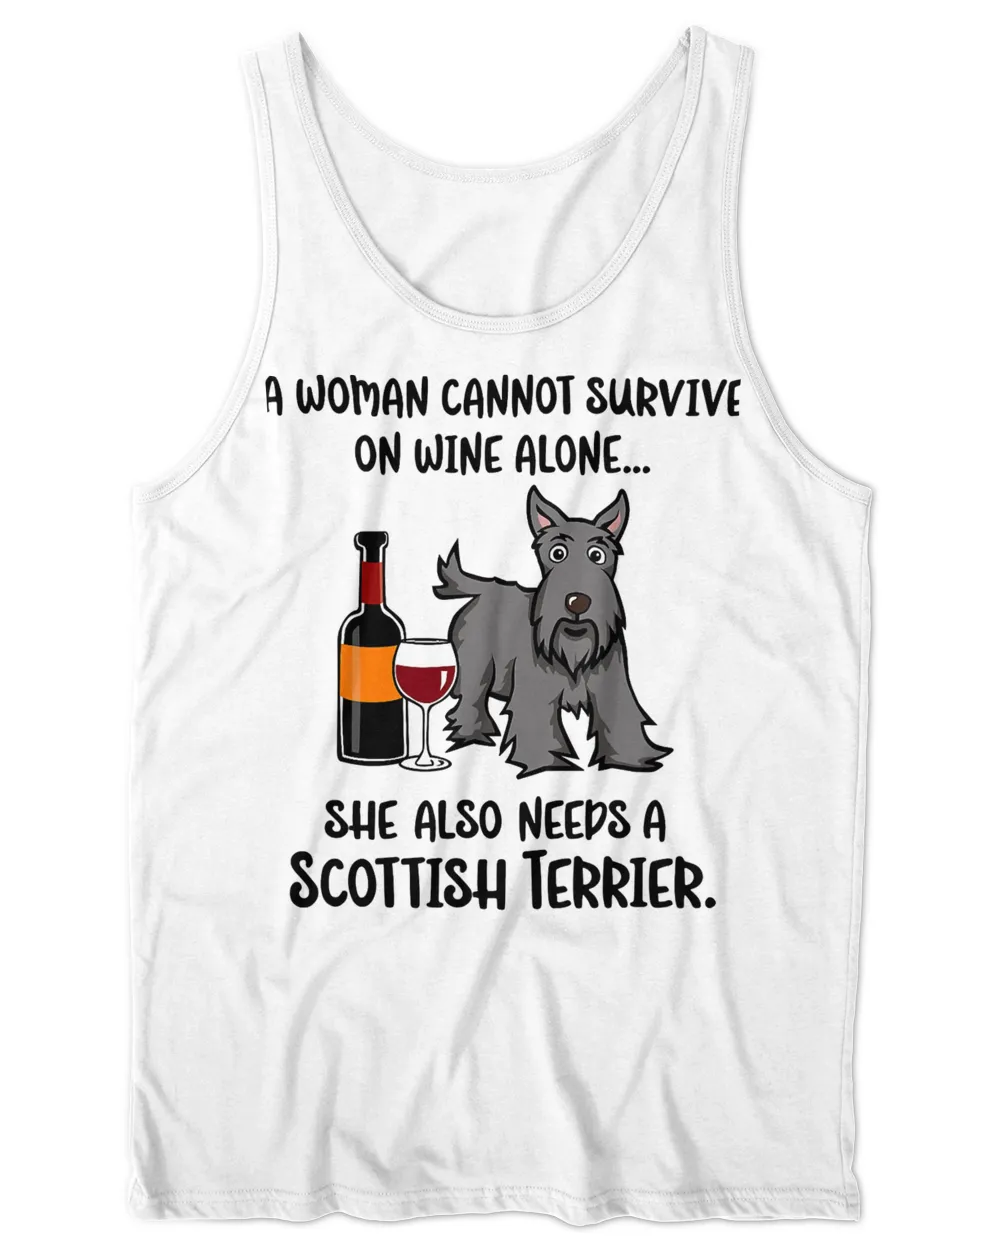 Funny Wine and Scottish Terrier T-Shirt for Scottie Dog Mom T-Shirt